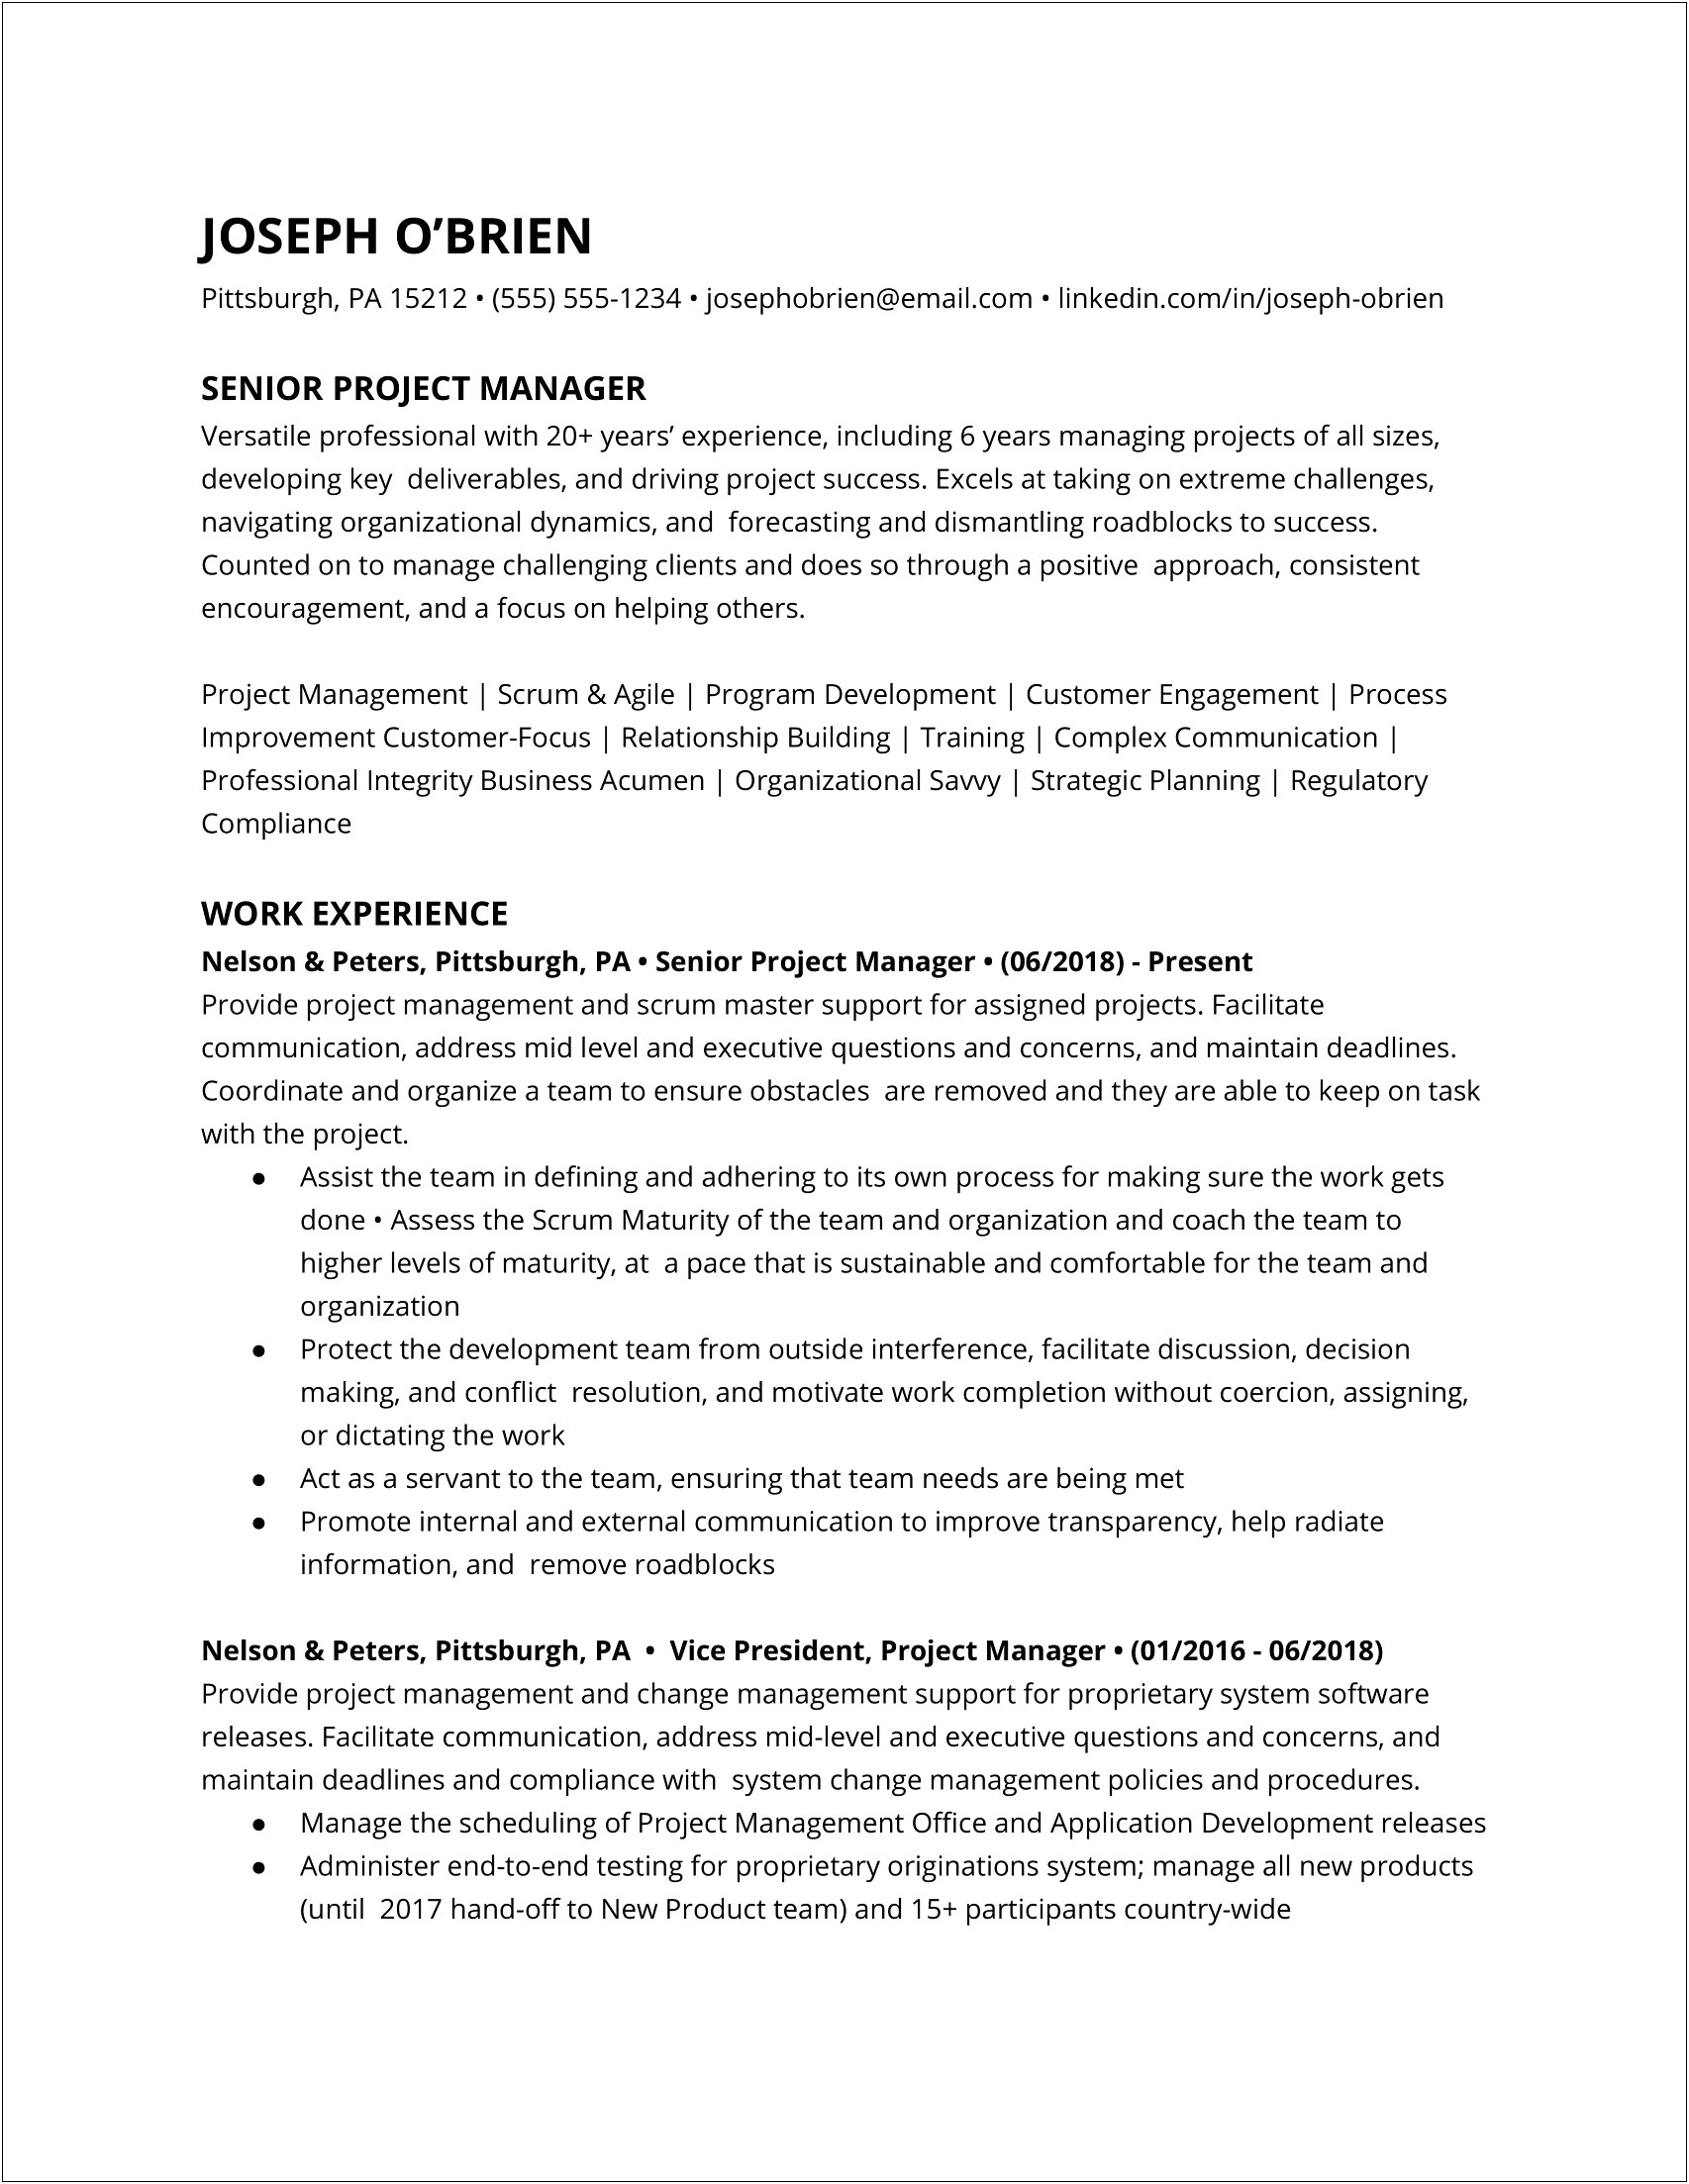 Company Asked For Project Manager Resume